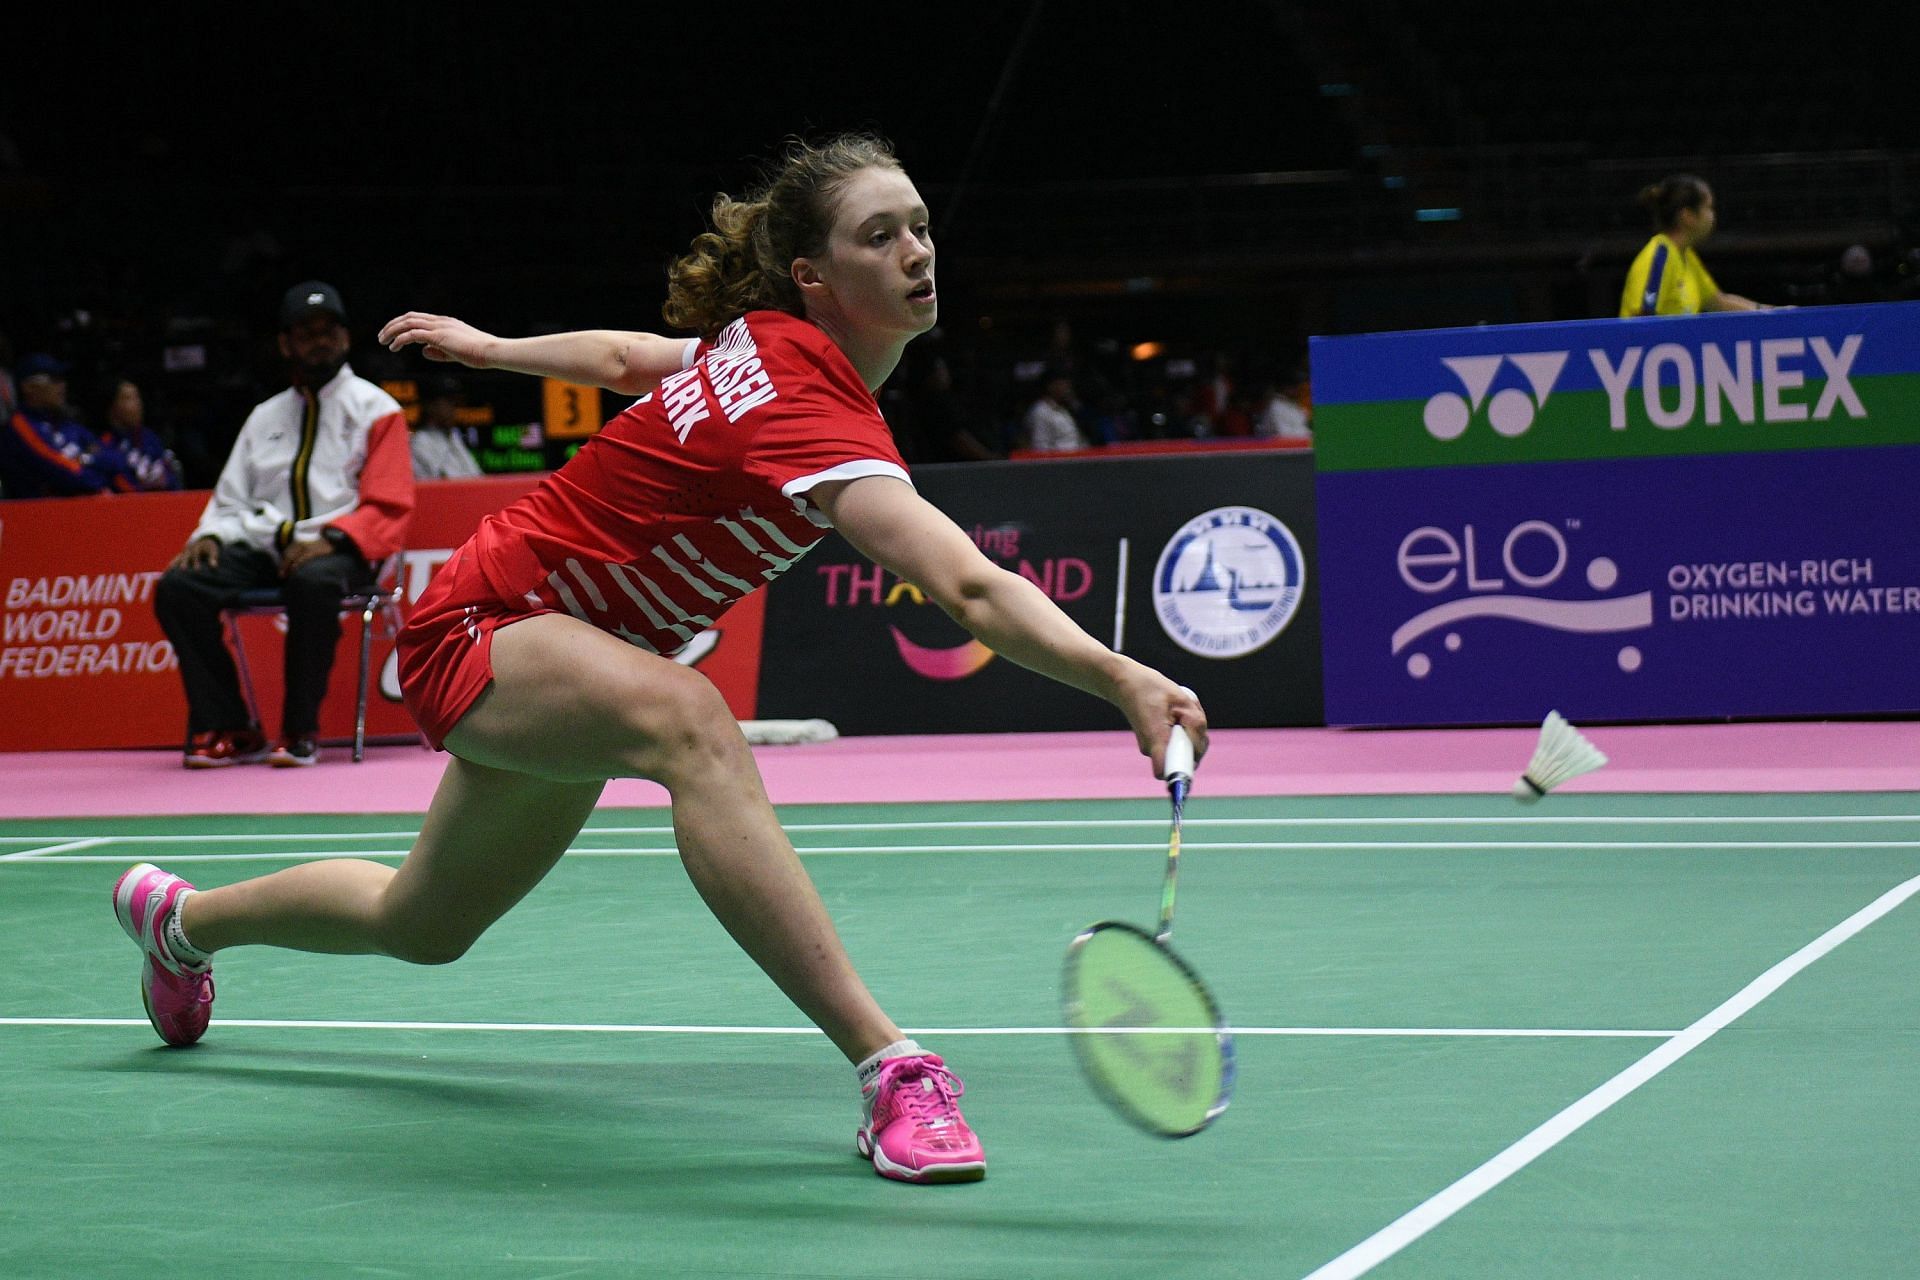 Line Christophersen in action at an earlier edition of the Uber Cup (Image courtesy: Getty Images)